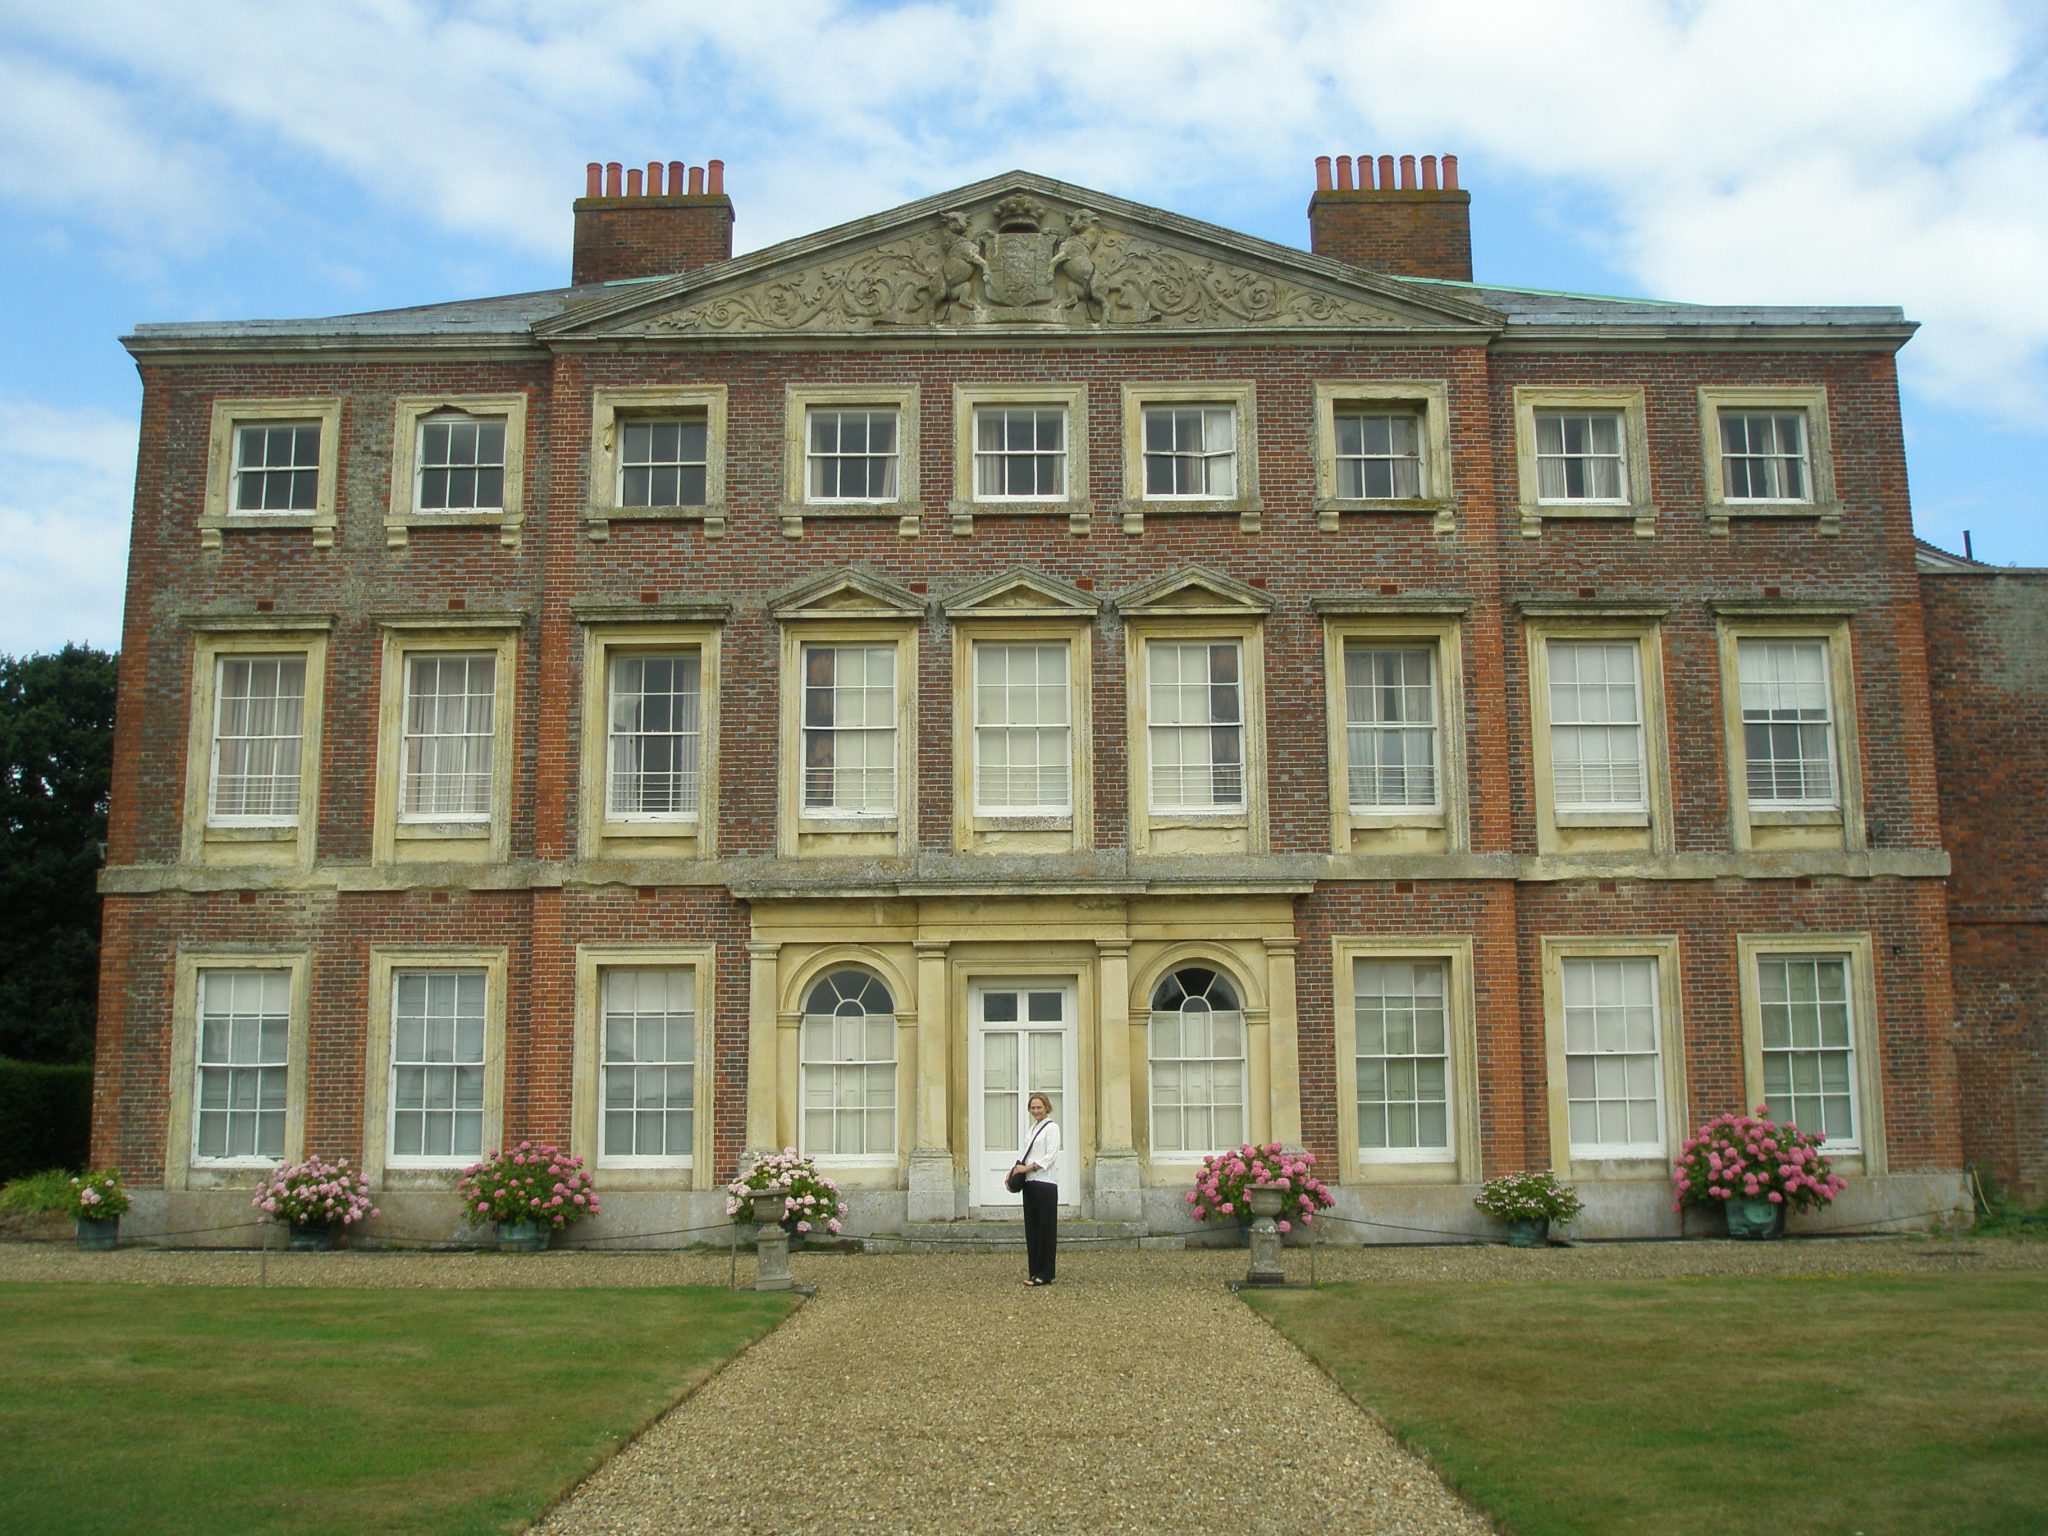 The House at Goodnestone Park, near Canterbury. Nan provides human scale here, in front of the manor, which was built for Mister Brook Bridges, in 1700. Goodnestone (pronounced GUN-Stone) Park is famous because of its link to Jane Austen. In 1791, Elizabeth (daughter of Sir Brook Bridges, 3rd Baronet) married Edward Austen, a brother of Jane Austen. During the early years of their marriage, Elizabeth and Edward Austen lived at Rowling, a manor house close to Goodnestone Park, where Elizabeth's parents resided. Jane Austen was a frequent visitor, and made many references to Goodnestone Park in her letters. This photo was taken on August 8, 2013.